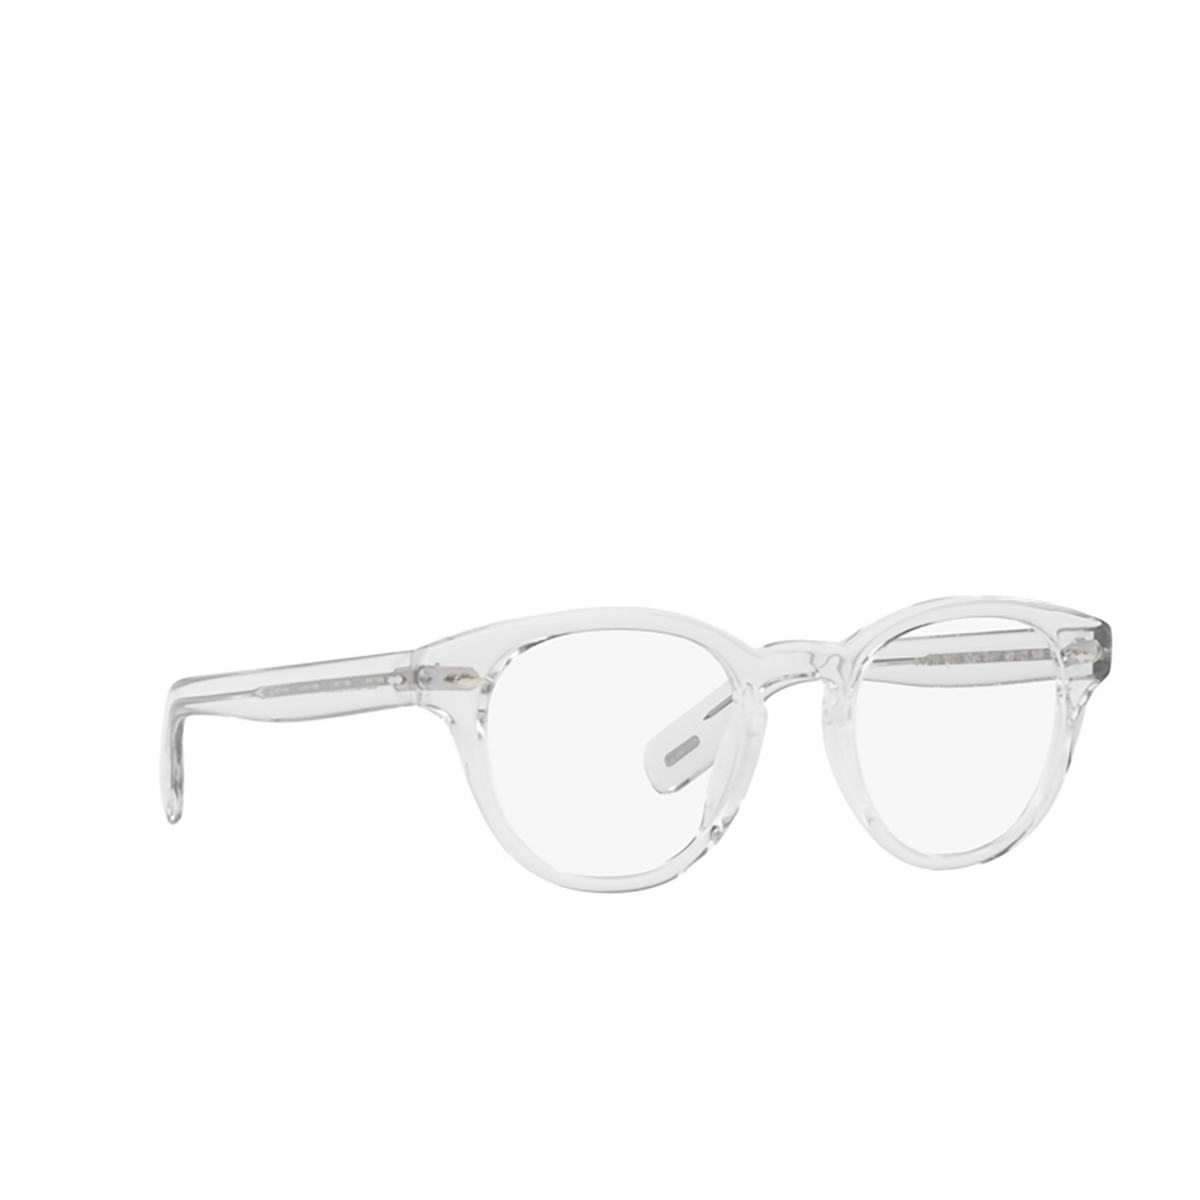 Oliver Peoples CARY GRANT Eyeglasses 1101 Crystal - three-quarters view